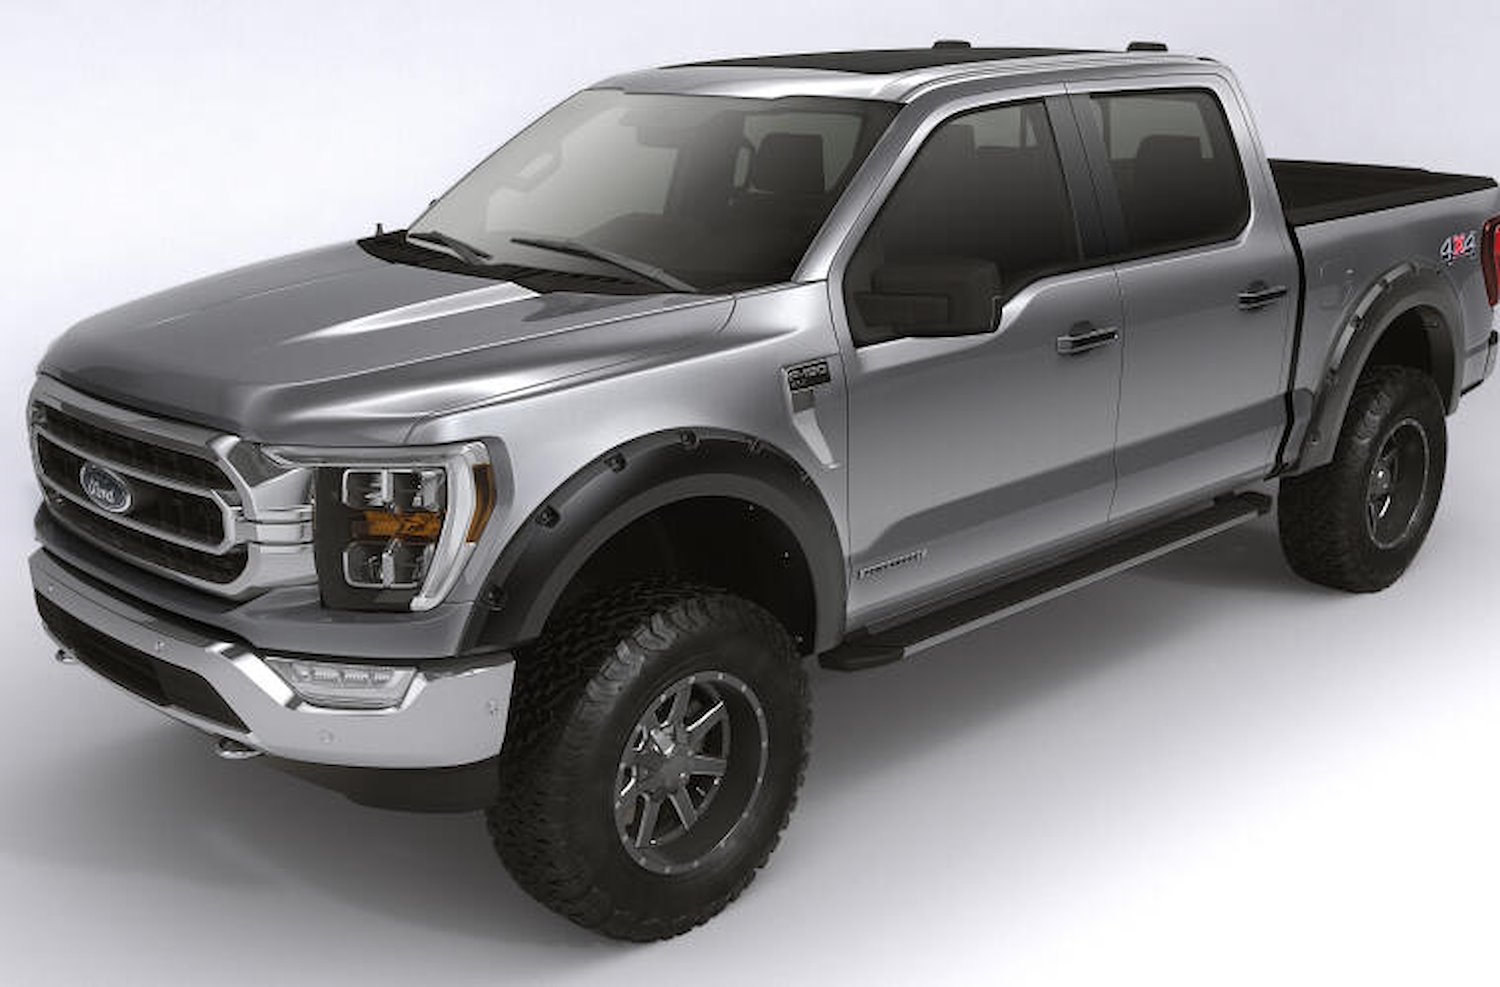 Forge Front/Rear Fender Flares for 2009-2014 Ford F-150